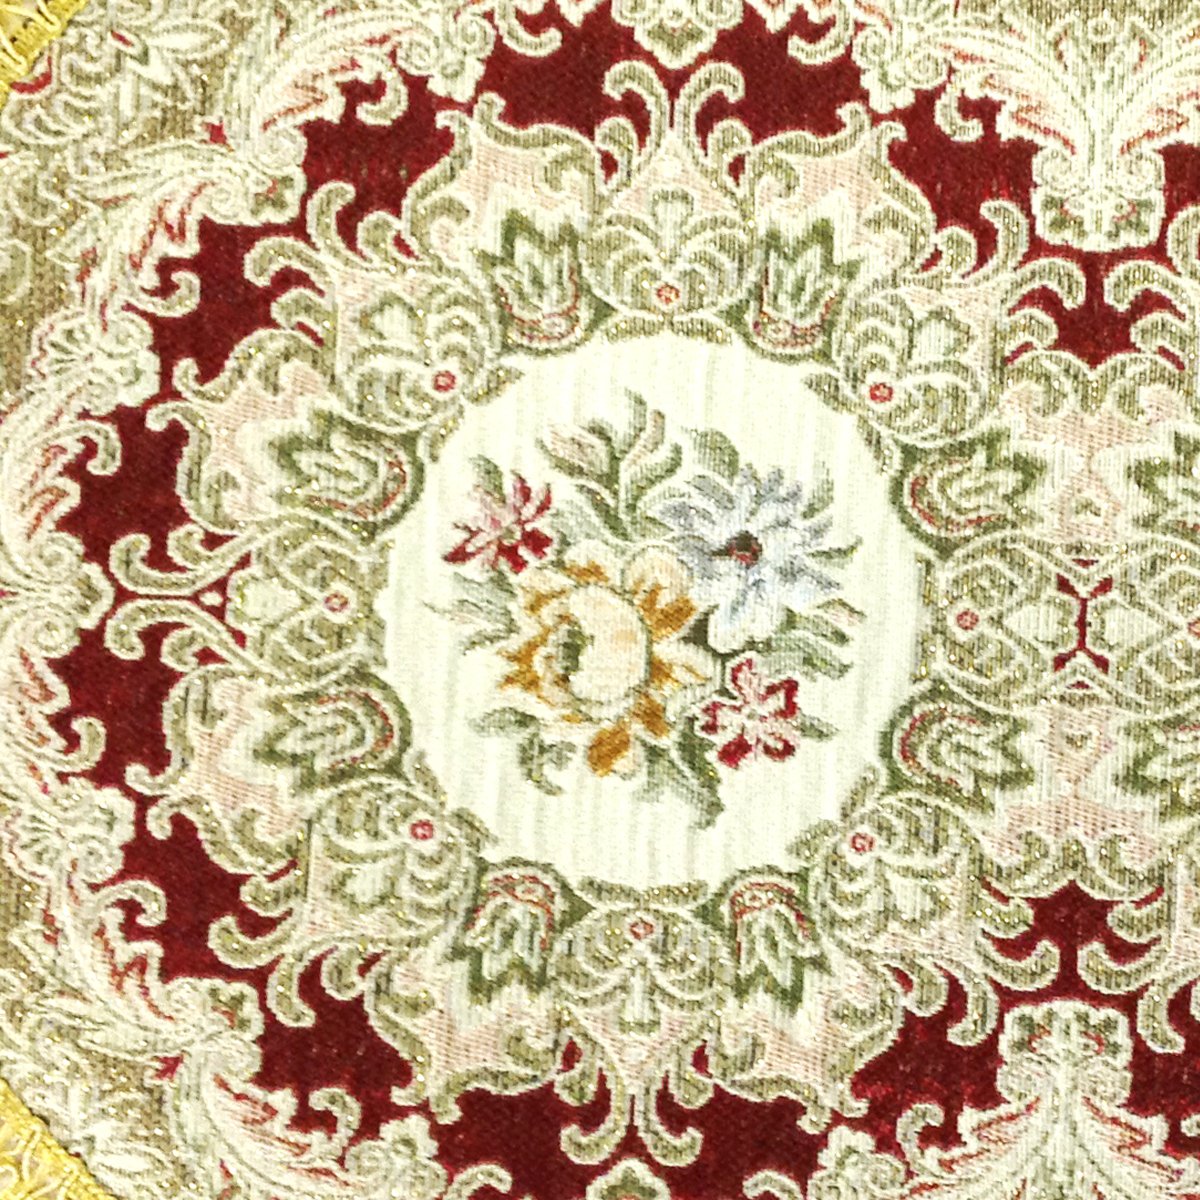 Wrapables 18.5 x 13 Inch Oval Vintage Floral Placemat with Gold Embroidery